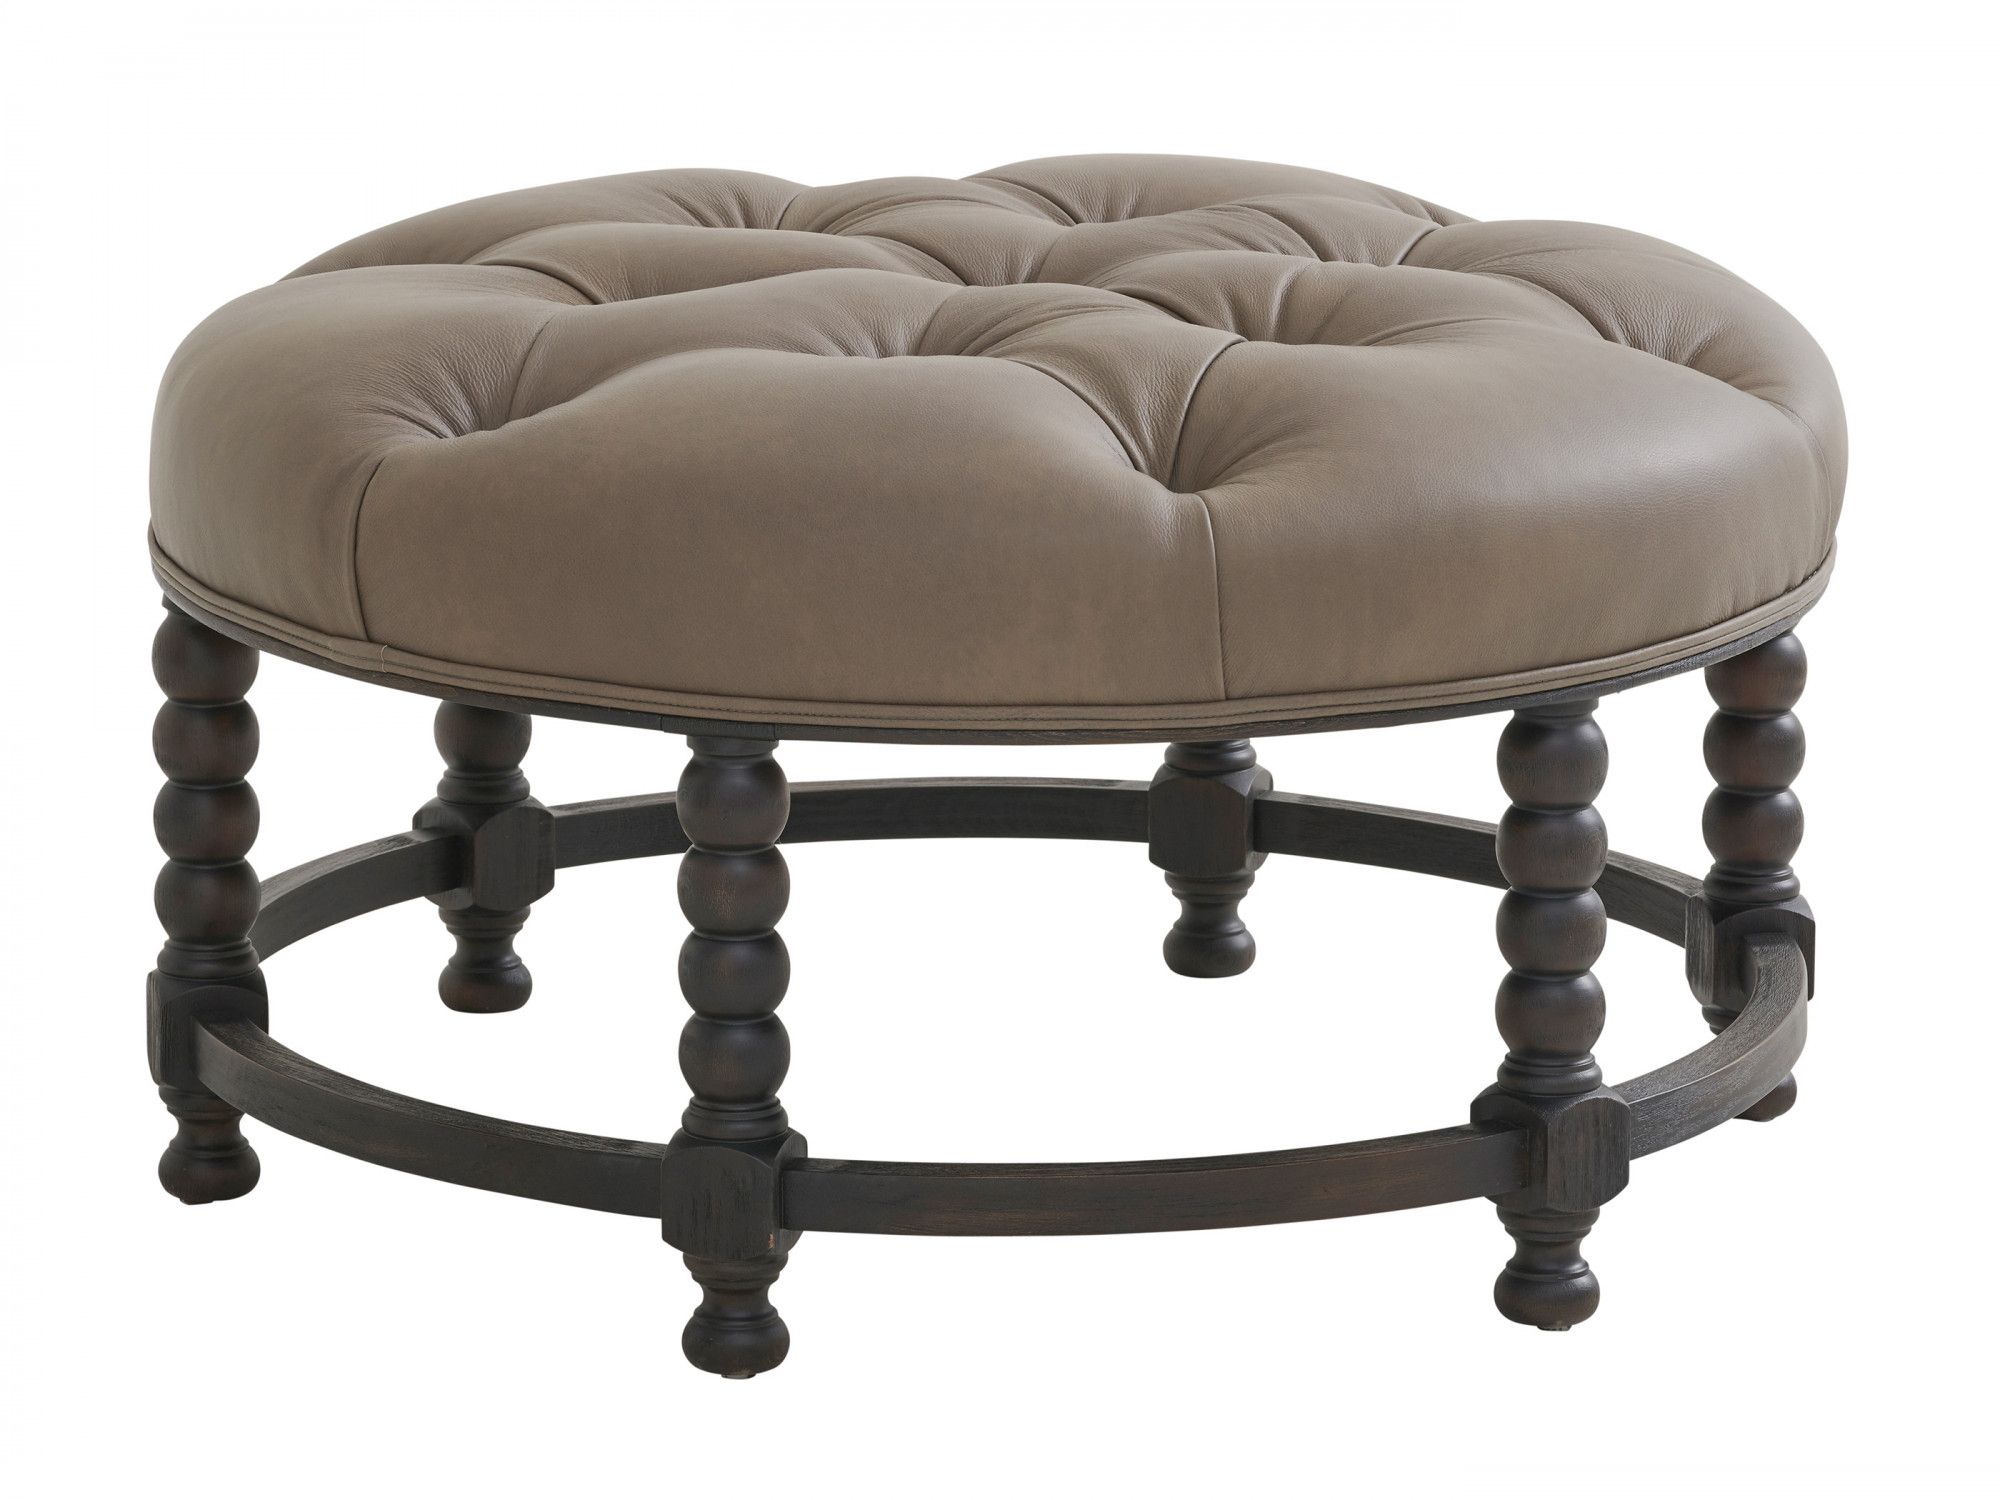 Hanover Leather Tufted Top Ottoman | Lexington Home Brands Pertaining To Brown Faux Leather Tufted Round Wood Ottomans (View 16 of 20)